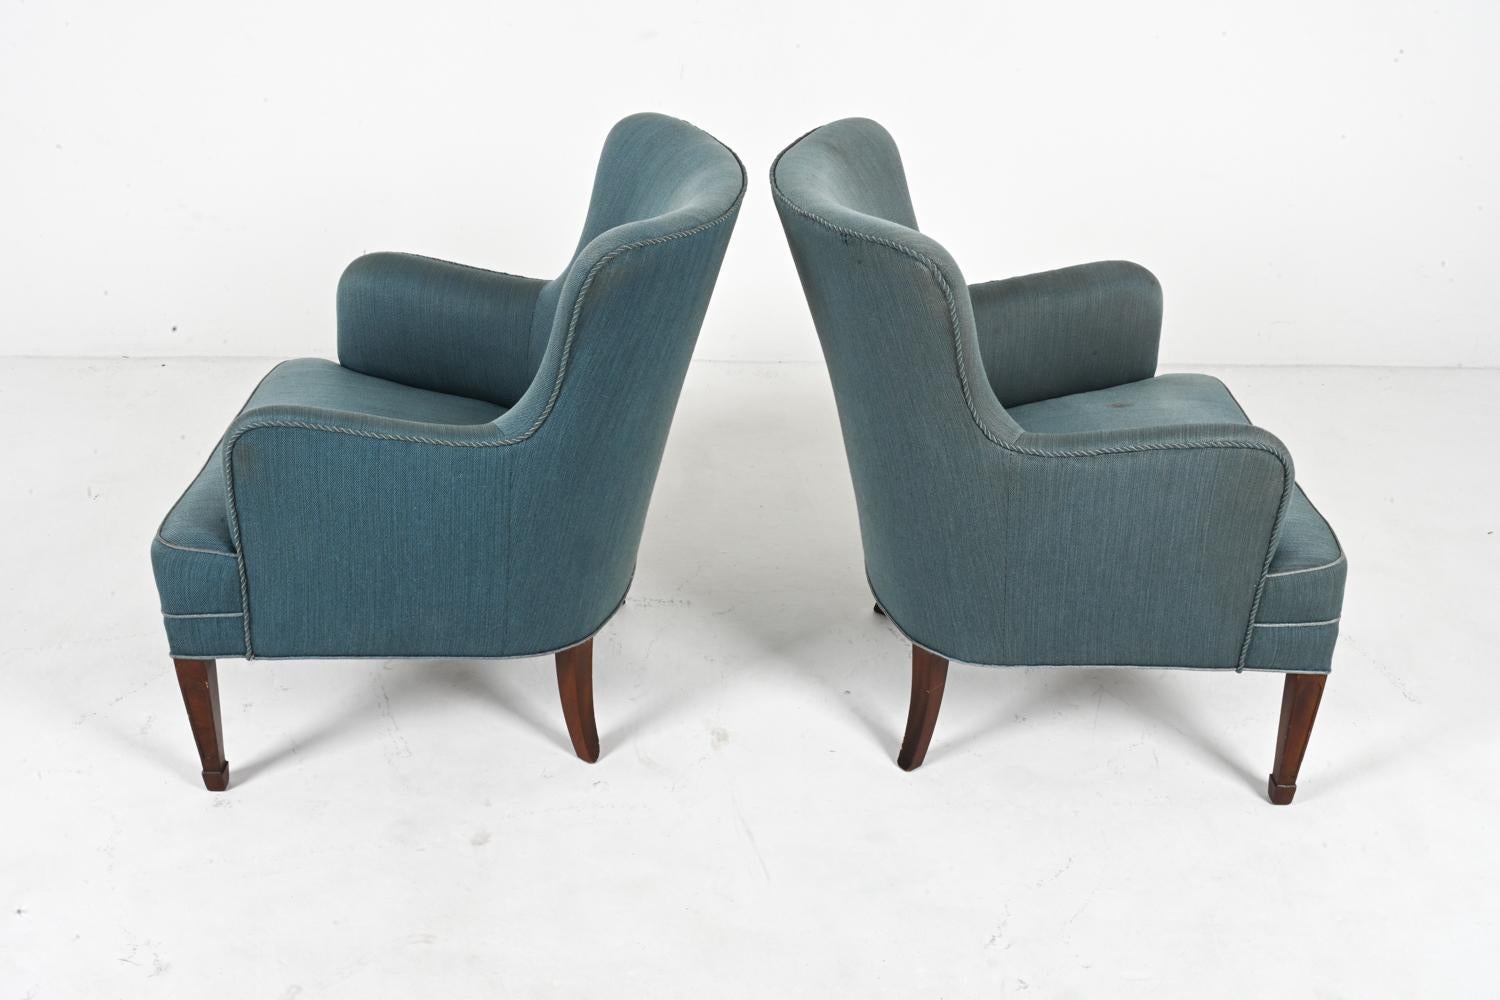 Pair of Frits Henningsen Easy Chairs in Mahogany, c. 1940's For Sale 4